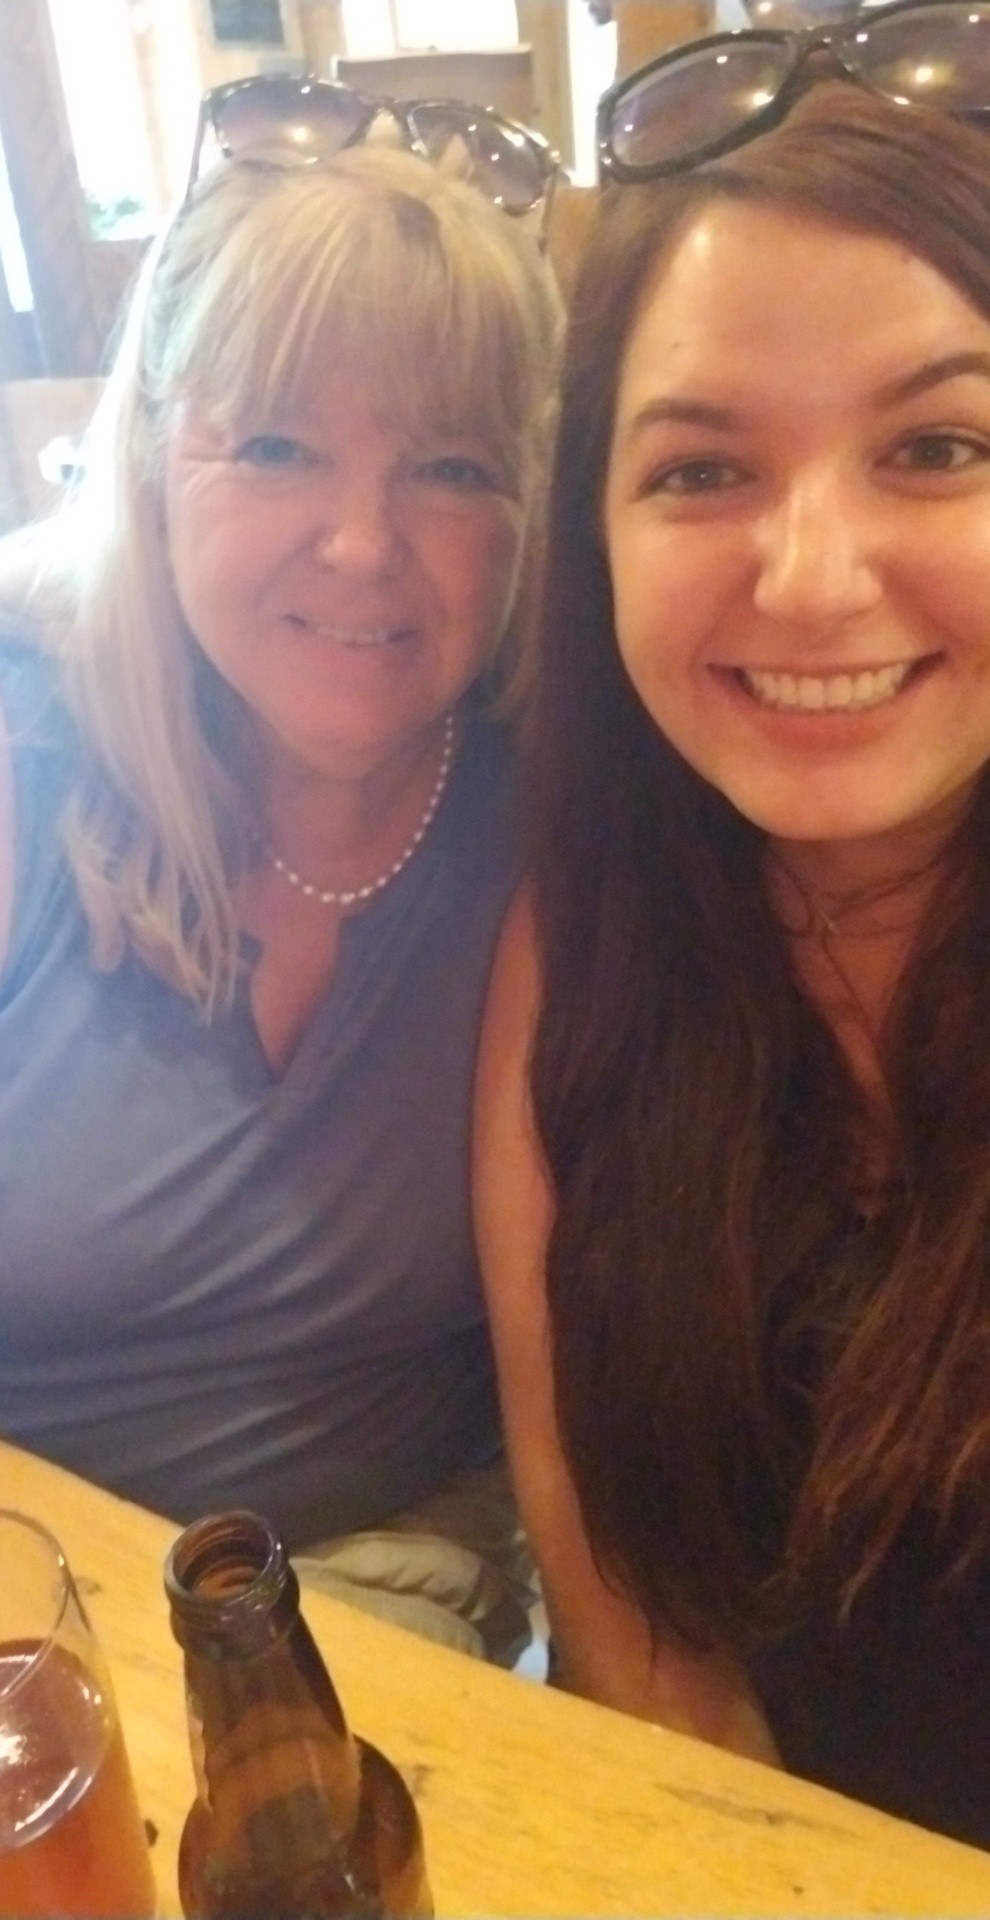 Me and mom paused for a selfie while enjoying drinks at Bigelow Brewery.